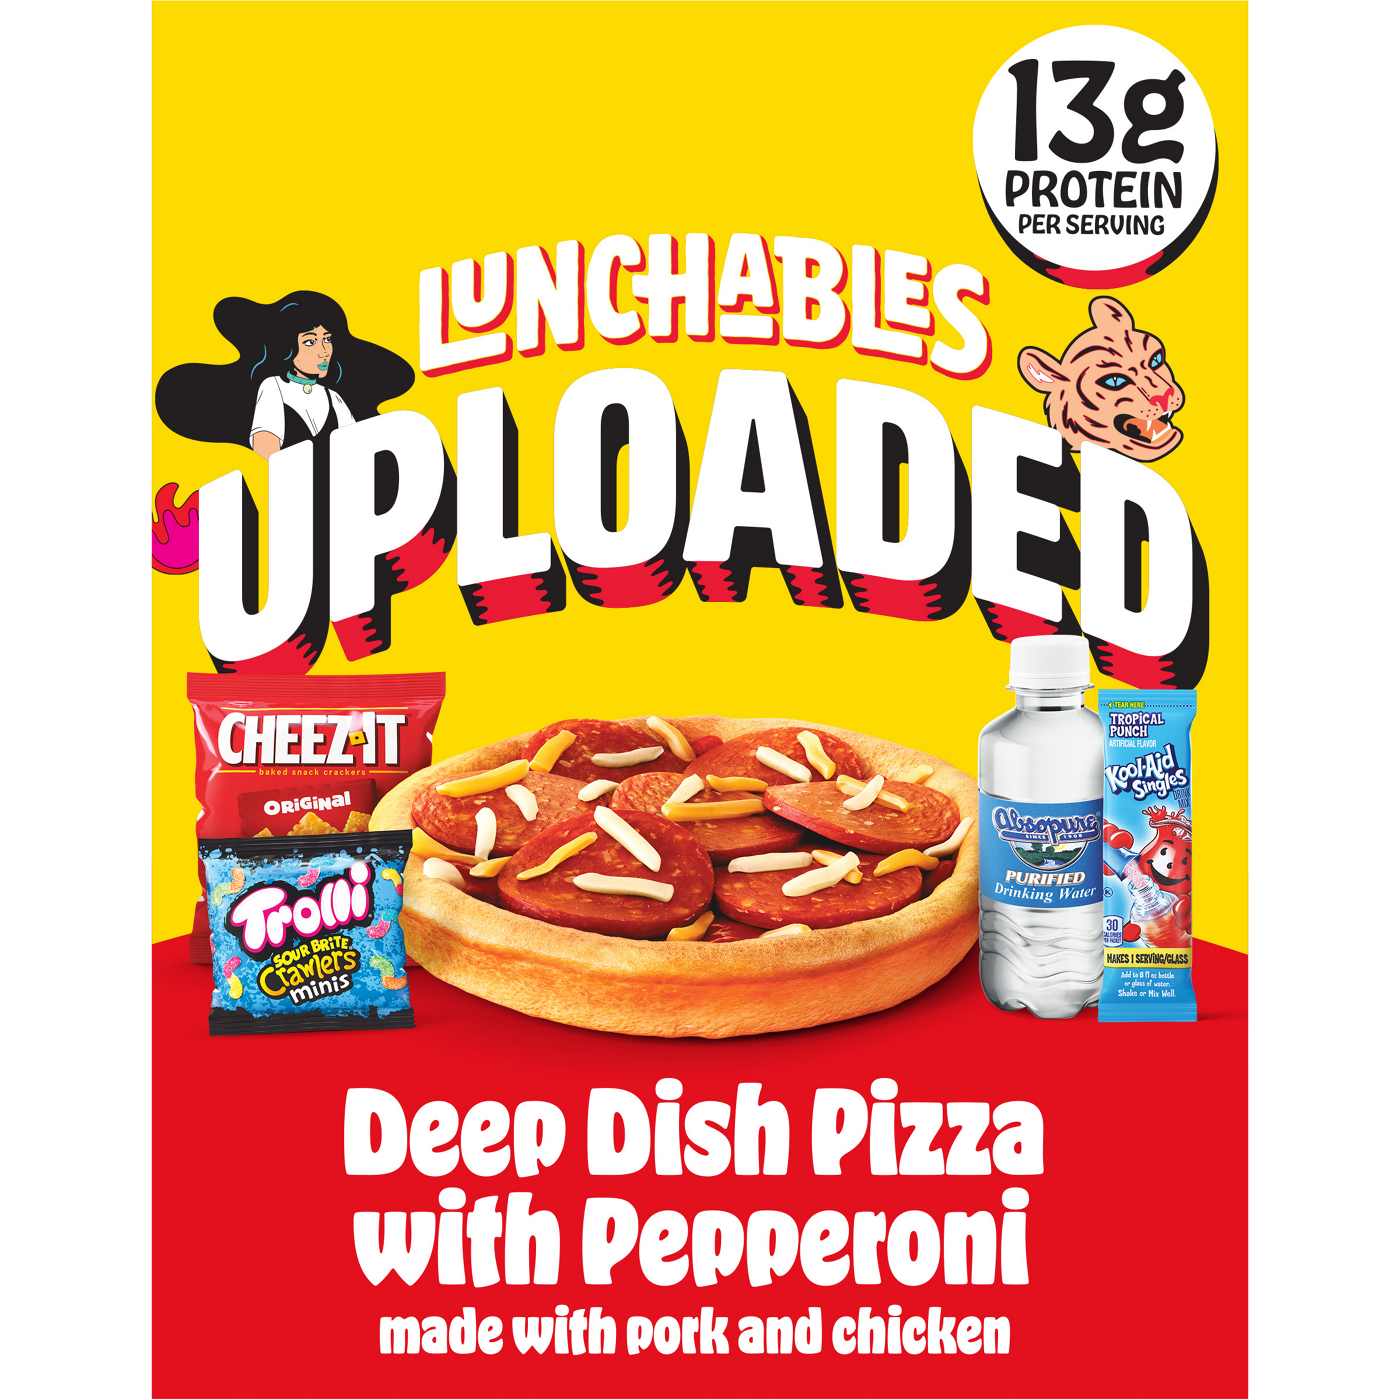 Lunchables Uploaded Meal Kit - Deep Dish Pizza with Pepperoni; image 1 of 5